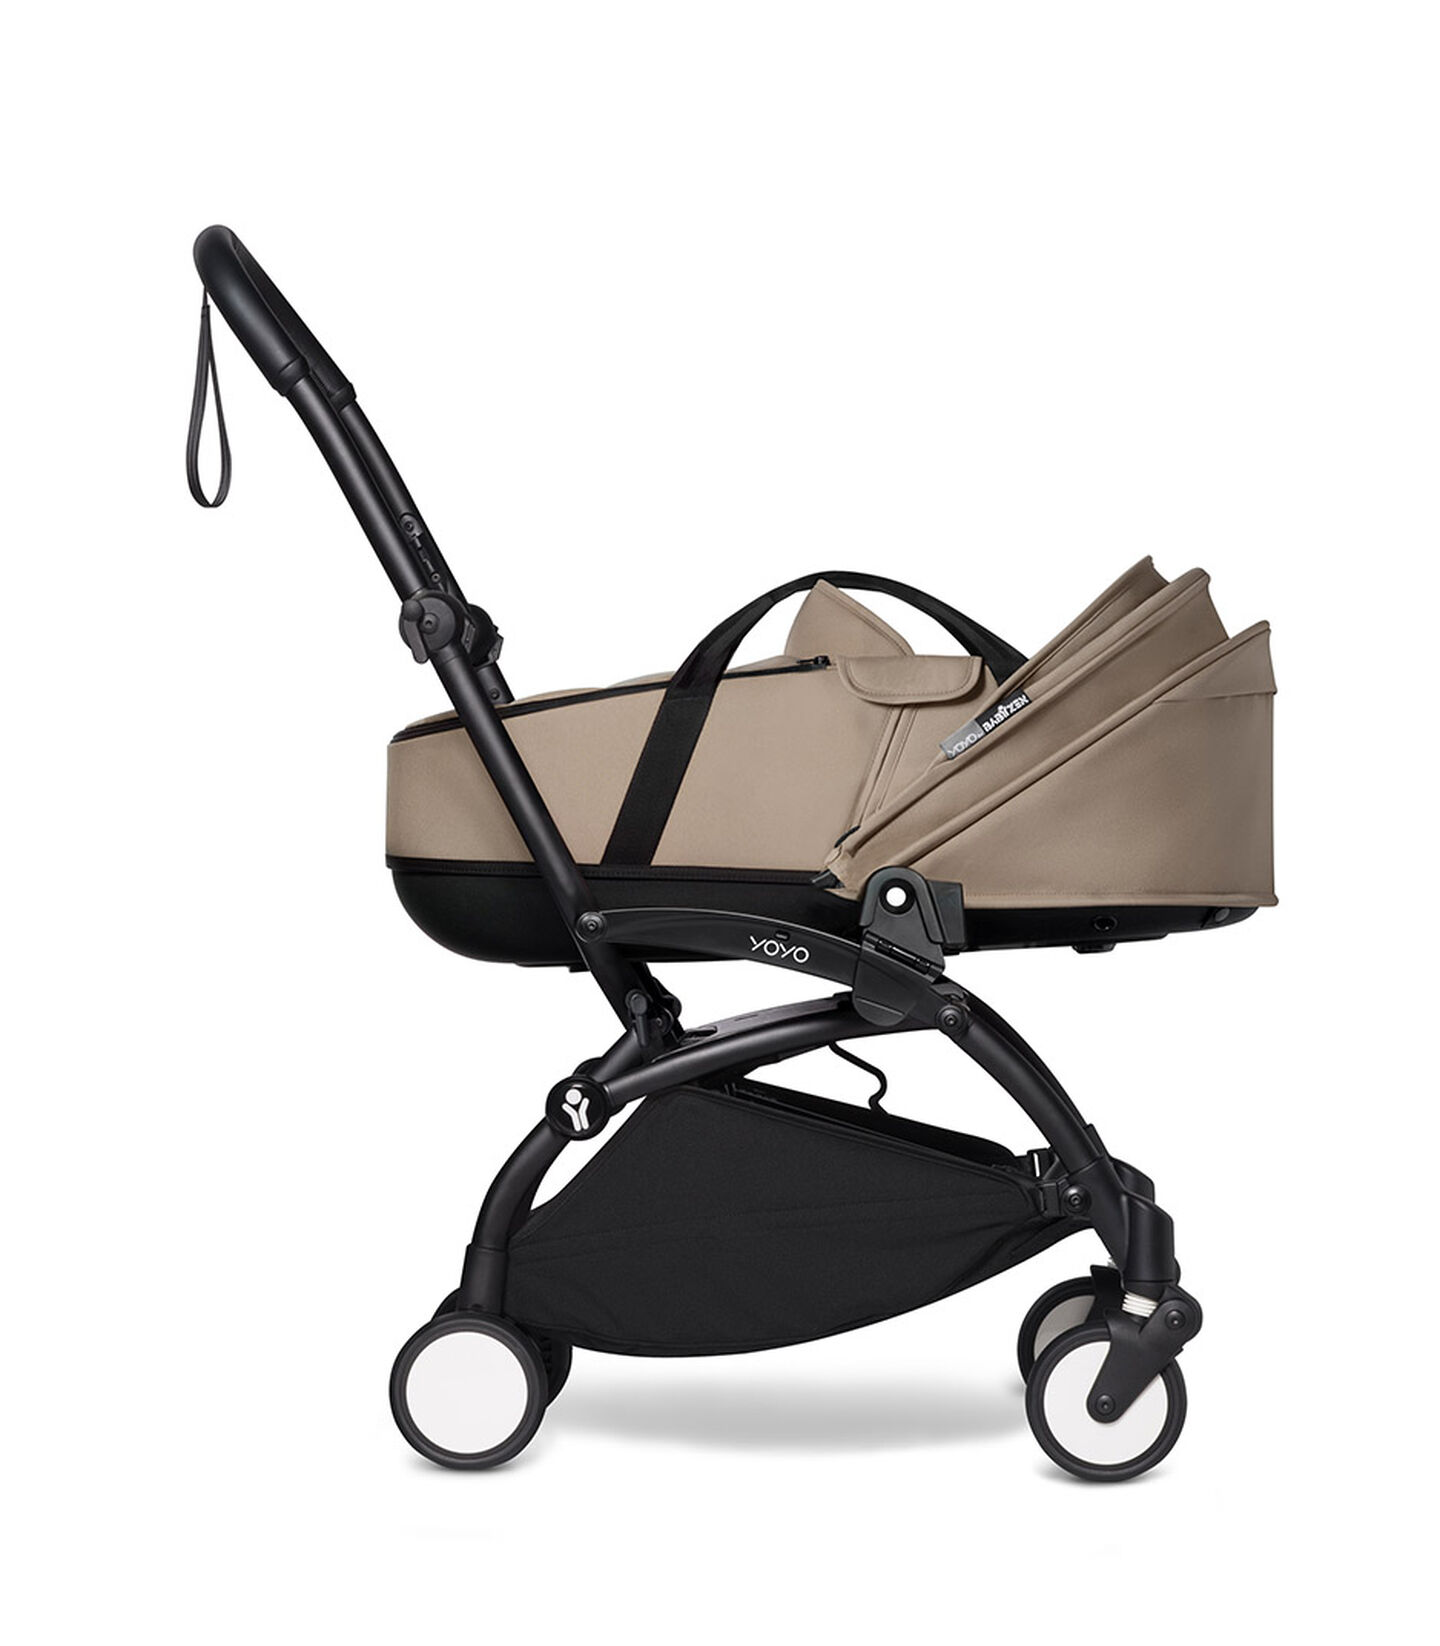 BABYZEN™ YOYO Bassinet - Taupe, Taupe, mainview view 7